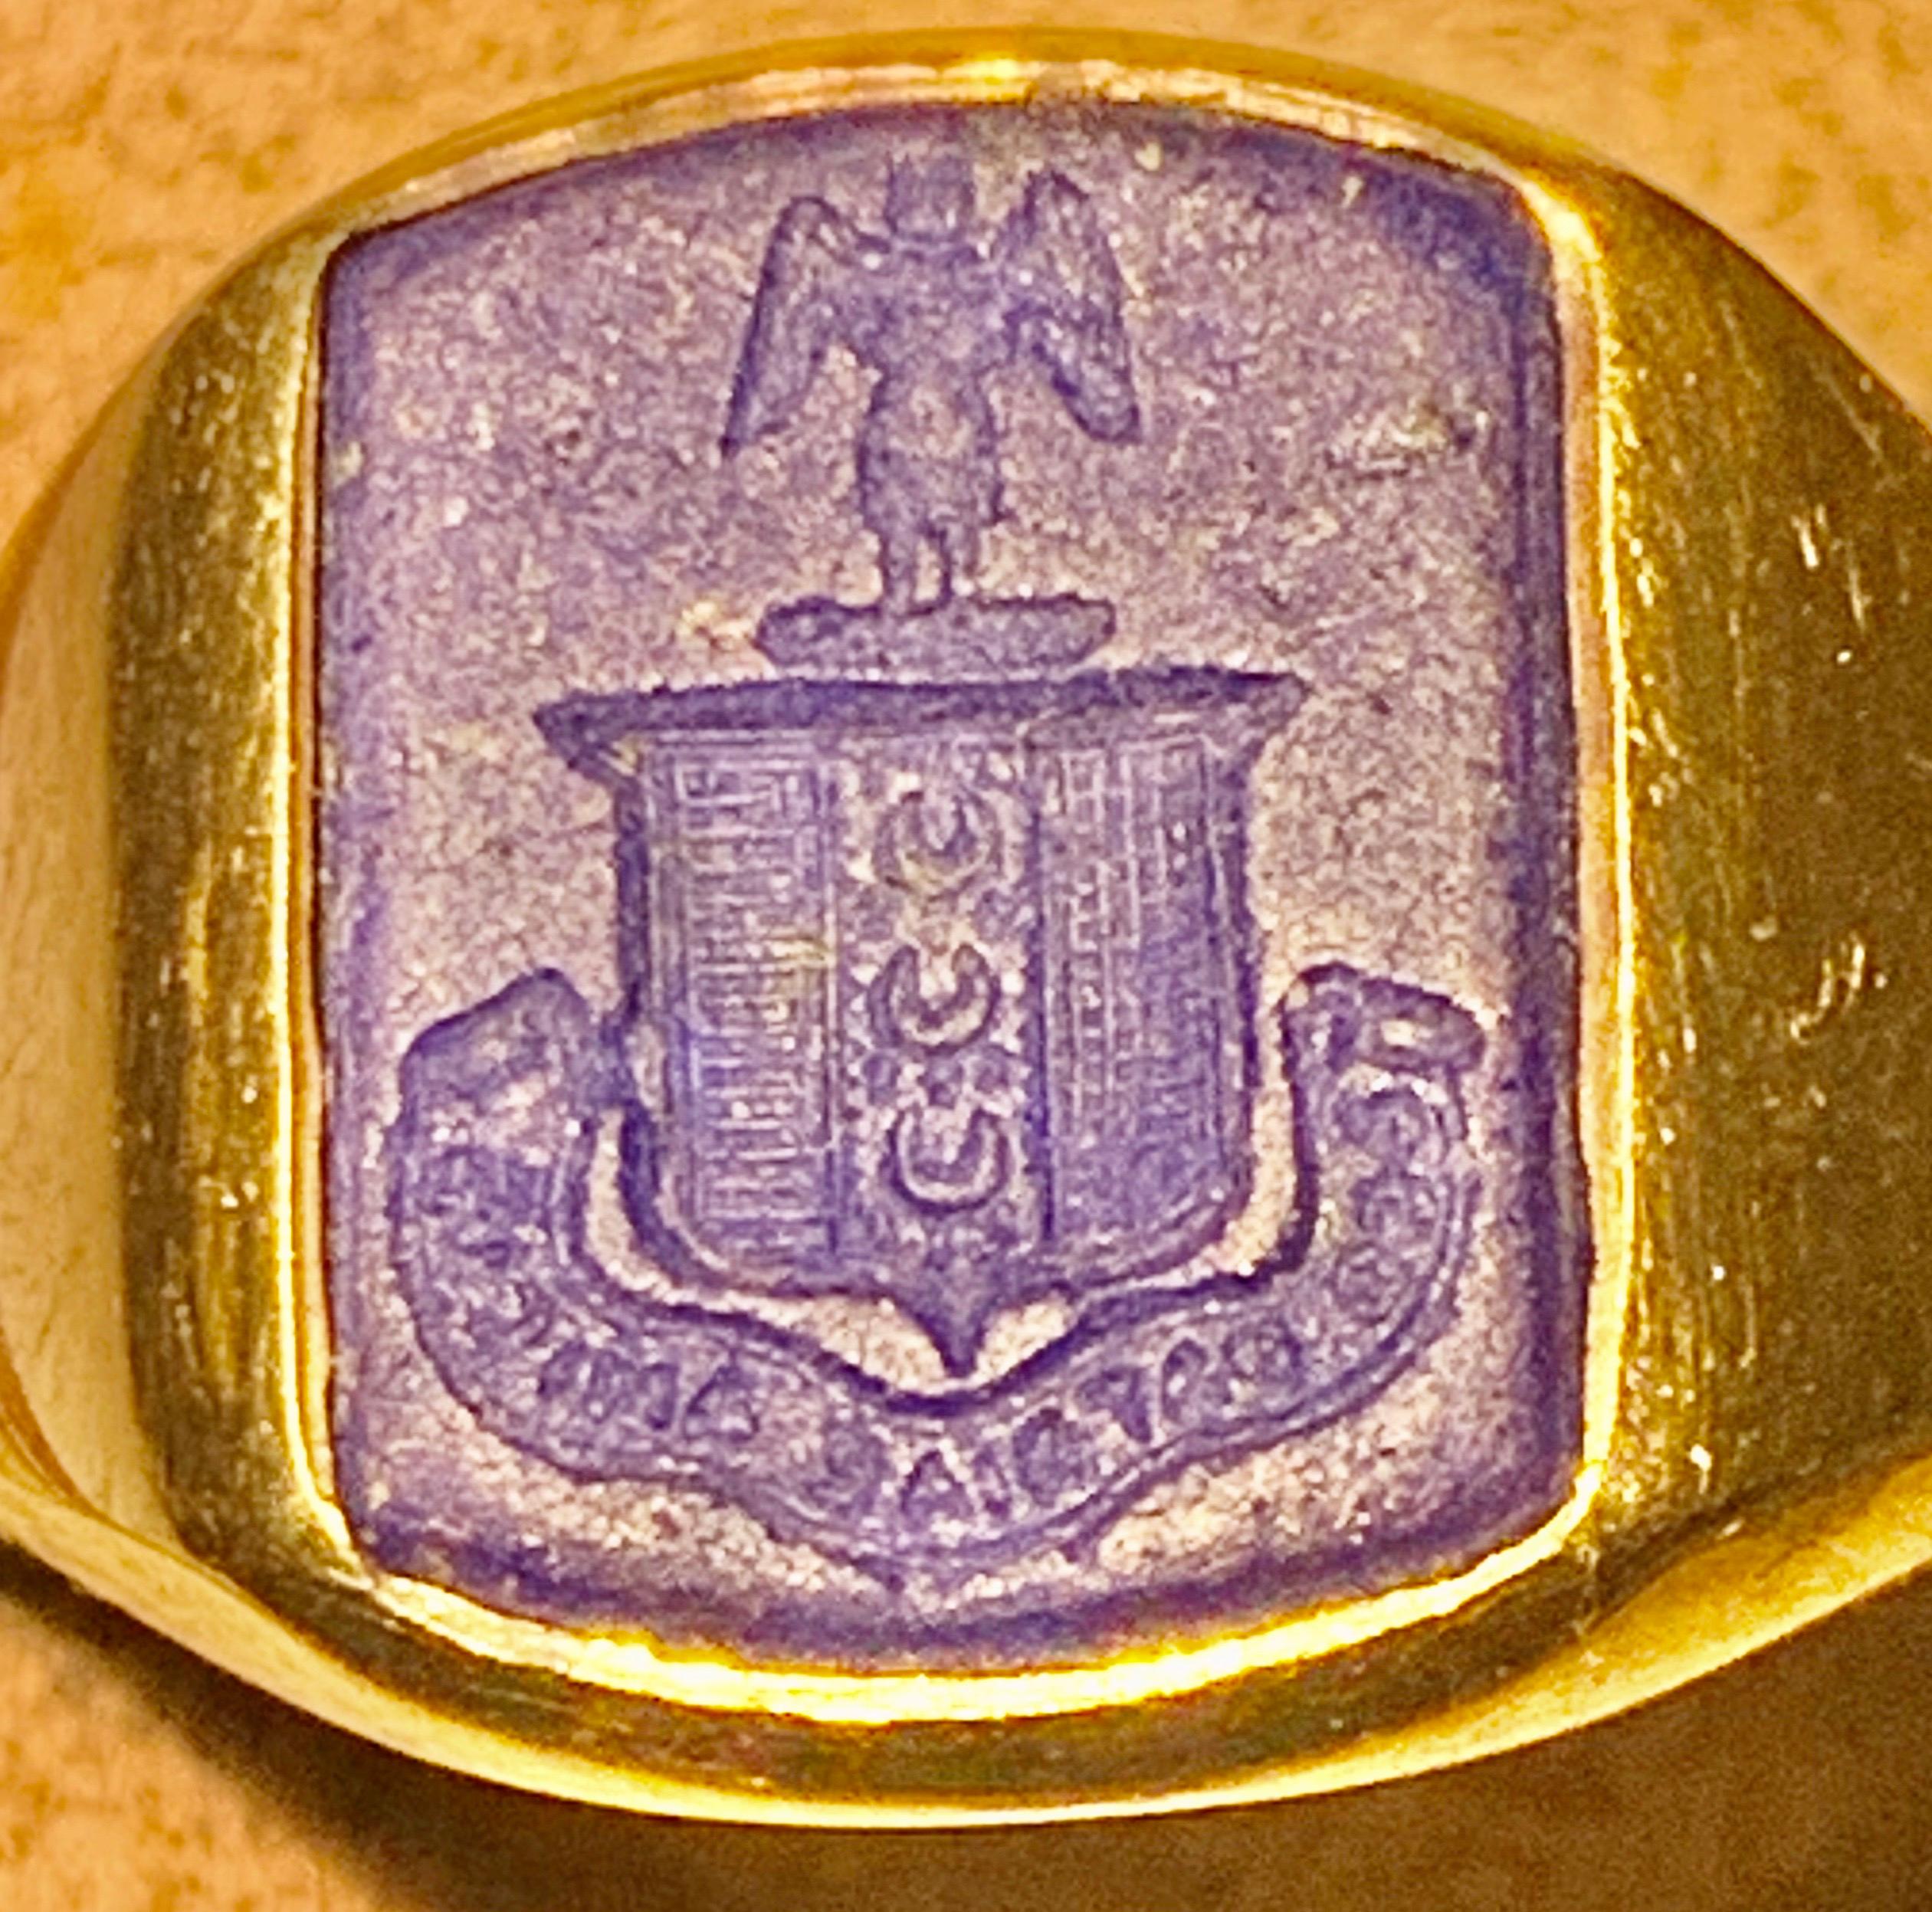 A Lovely Antique signet ring, set in 18K yellow gold.
Beautiful well-detailed crest, a nice unisex ring with plain shoulders, this features a lapis lazuli intaglio of an excellent purplish blue color with some fine golden inclusions of pyrite. The